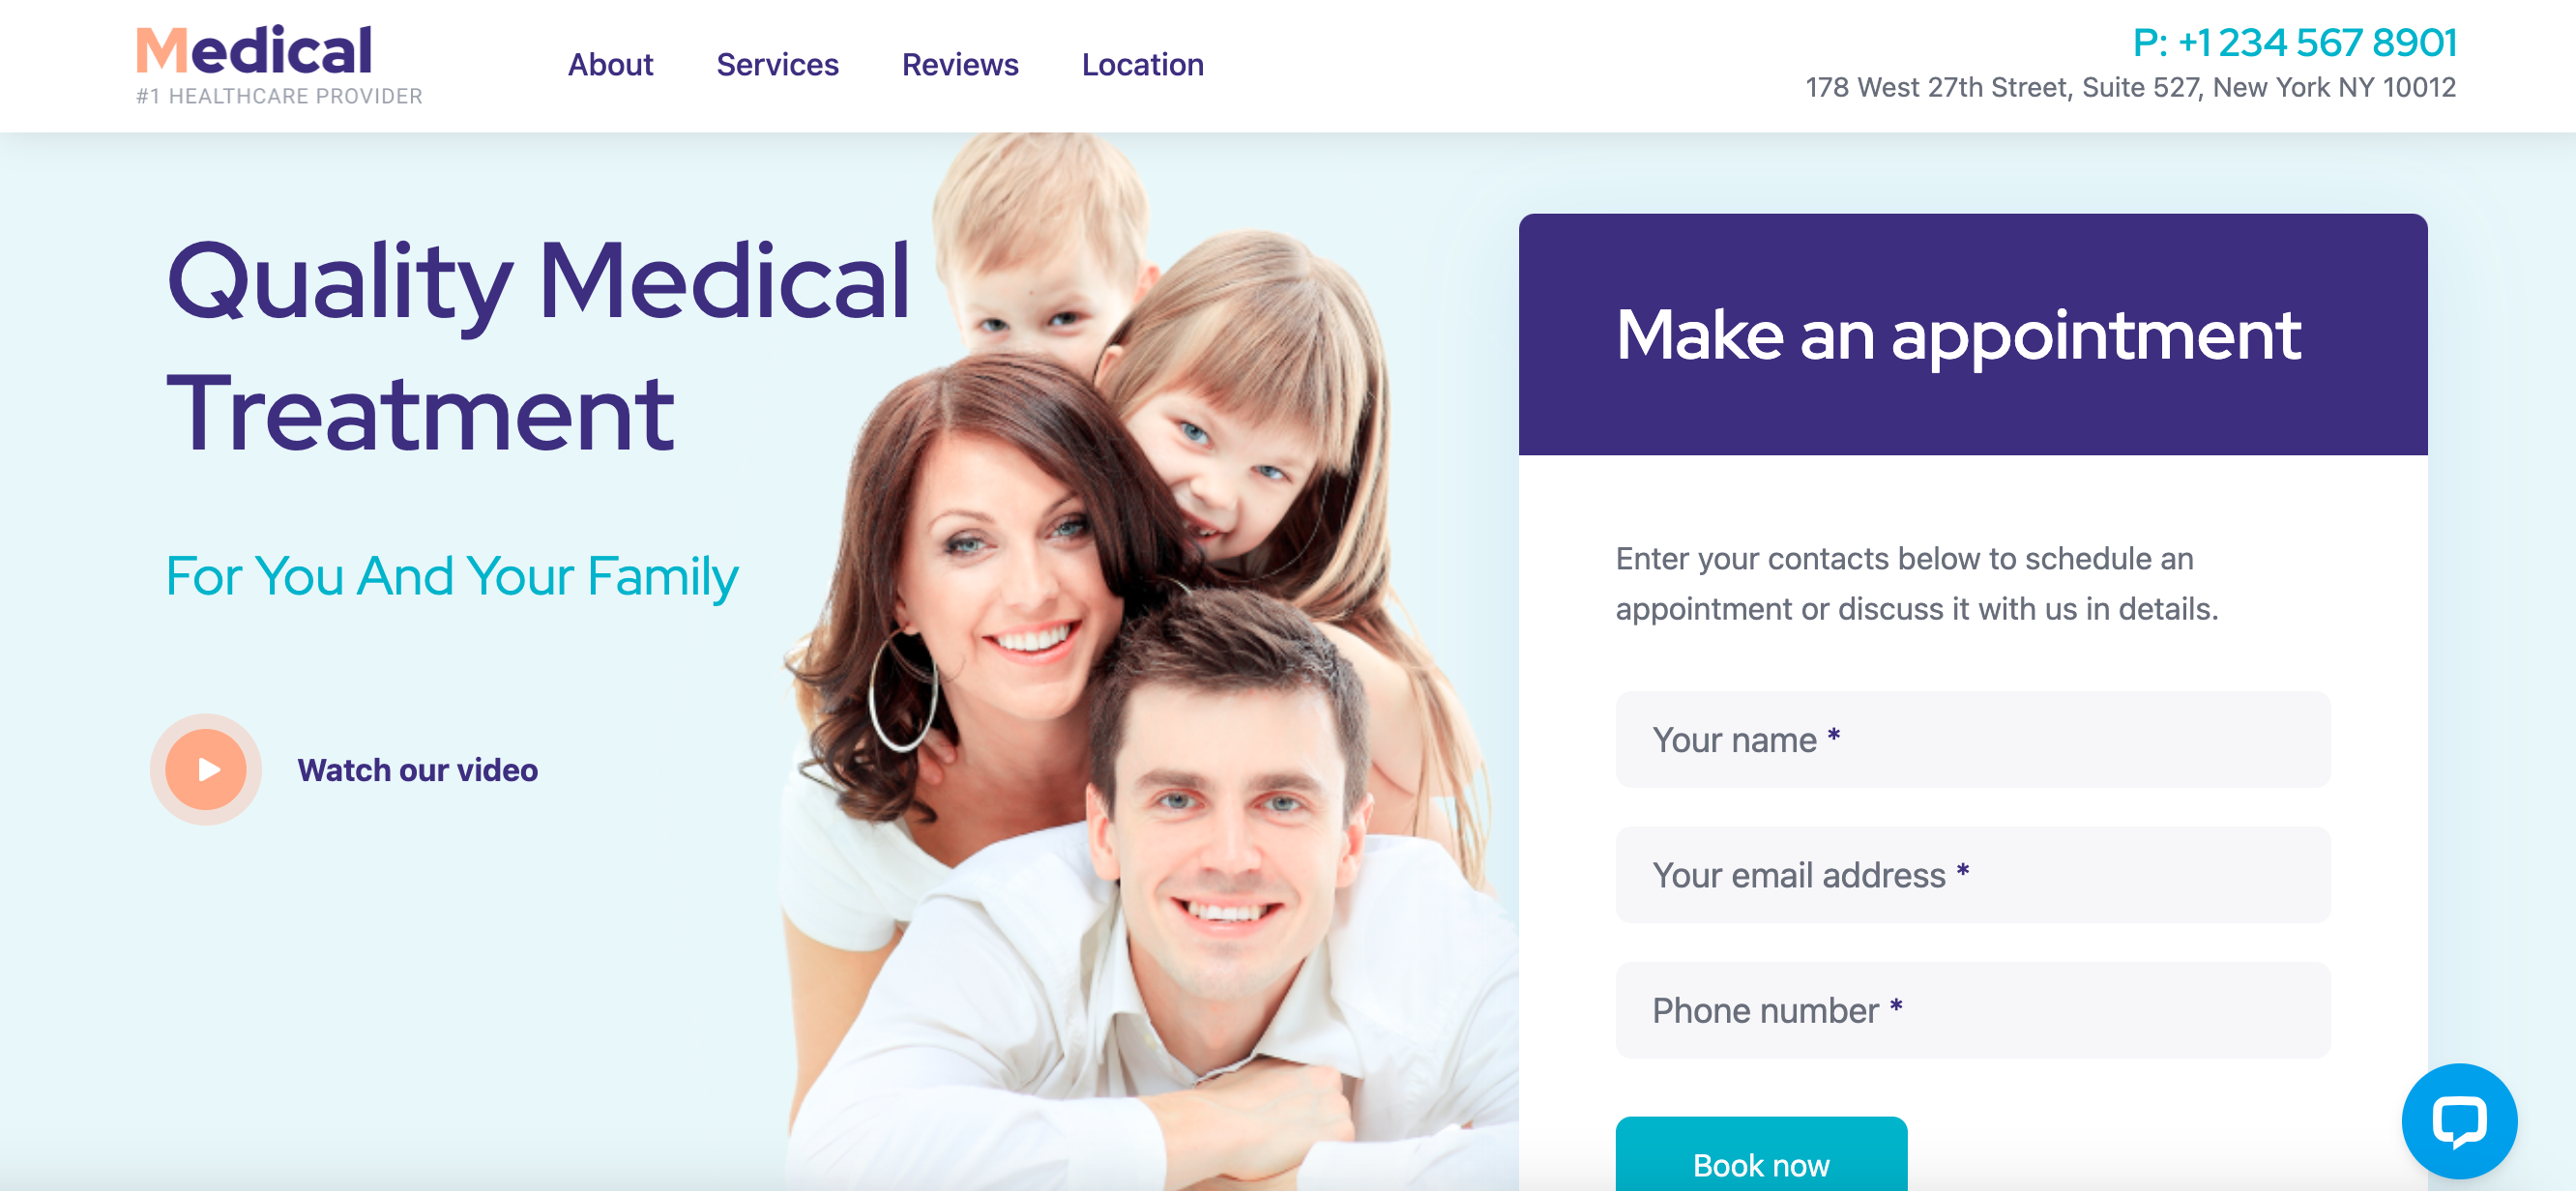 Healthcare landing page example